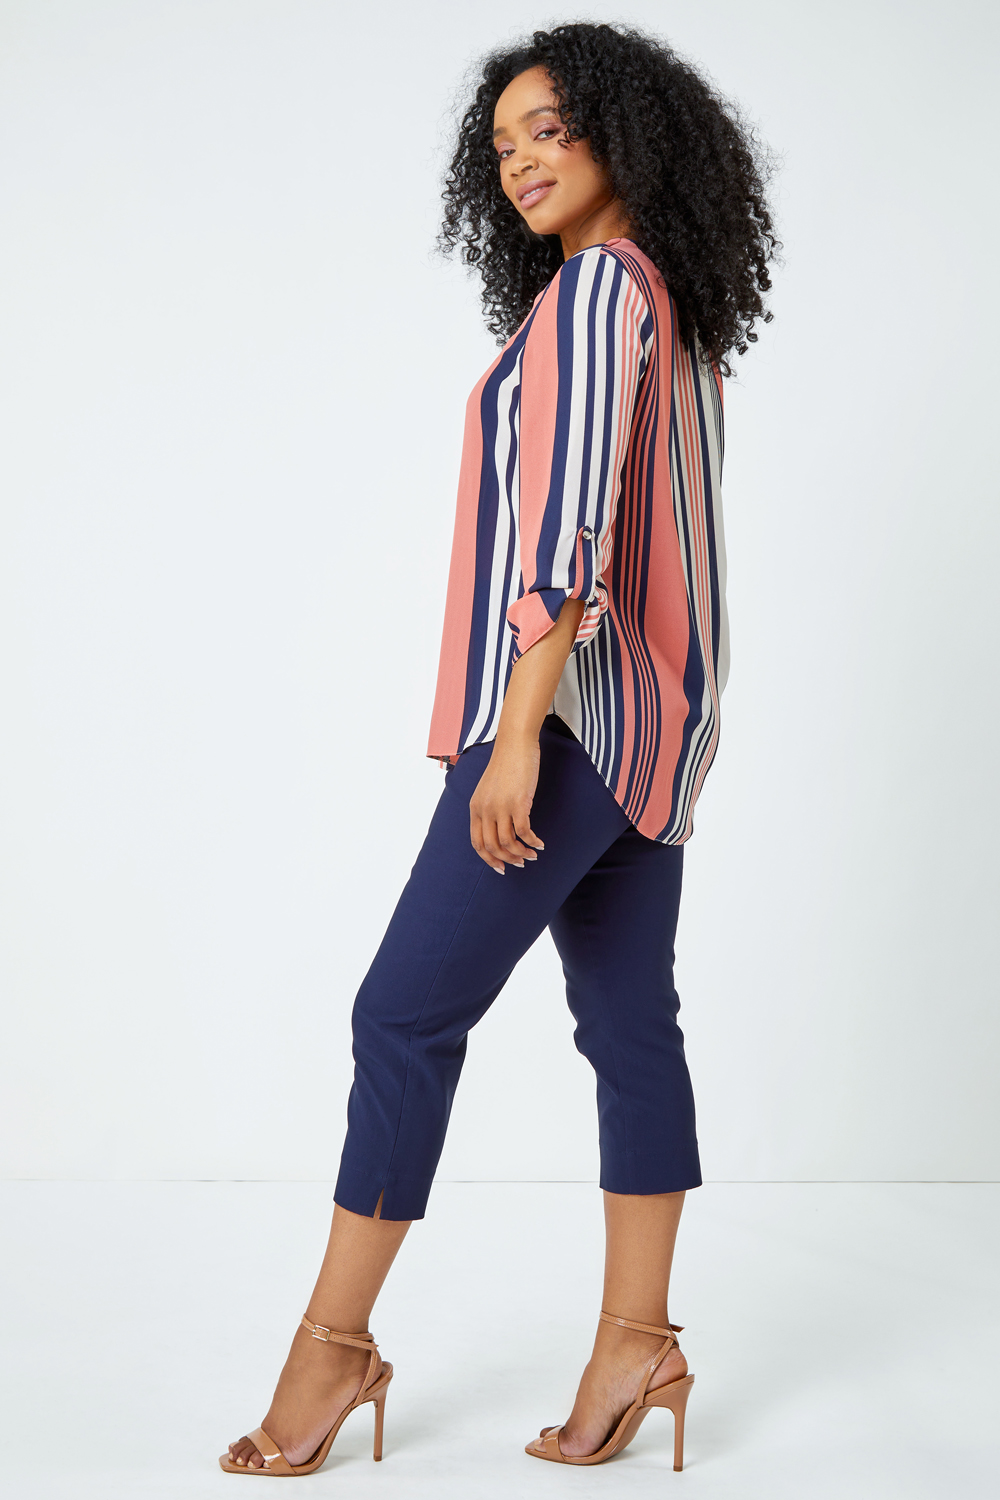 CORAL Petite Pleat Front Stripe Top, Image 2 of 5